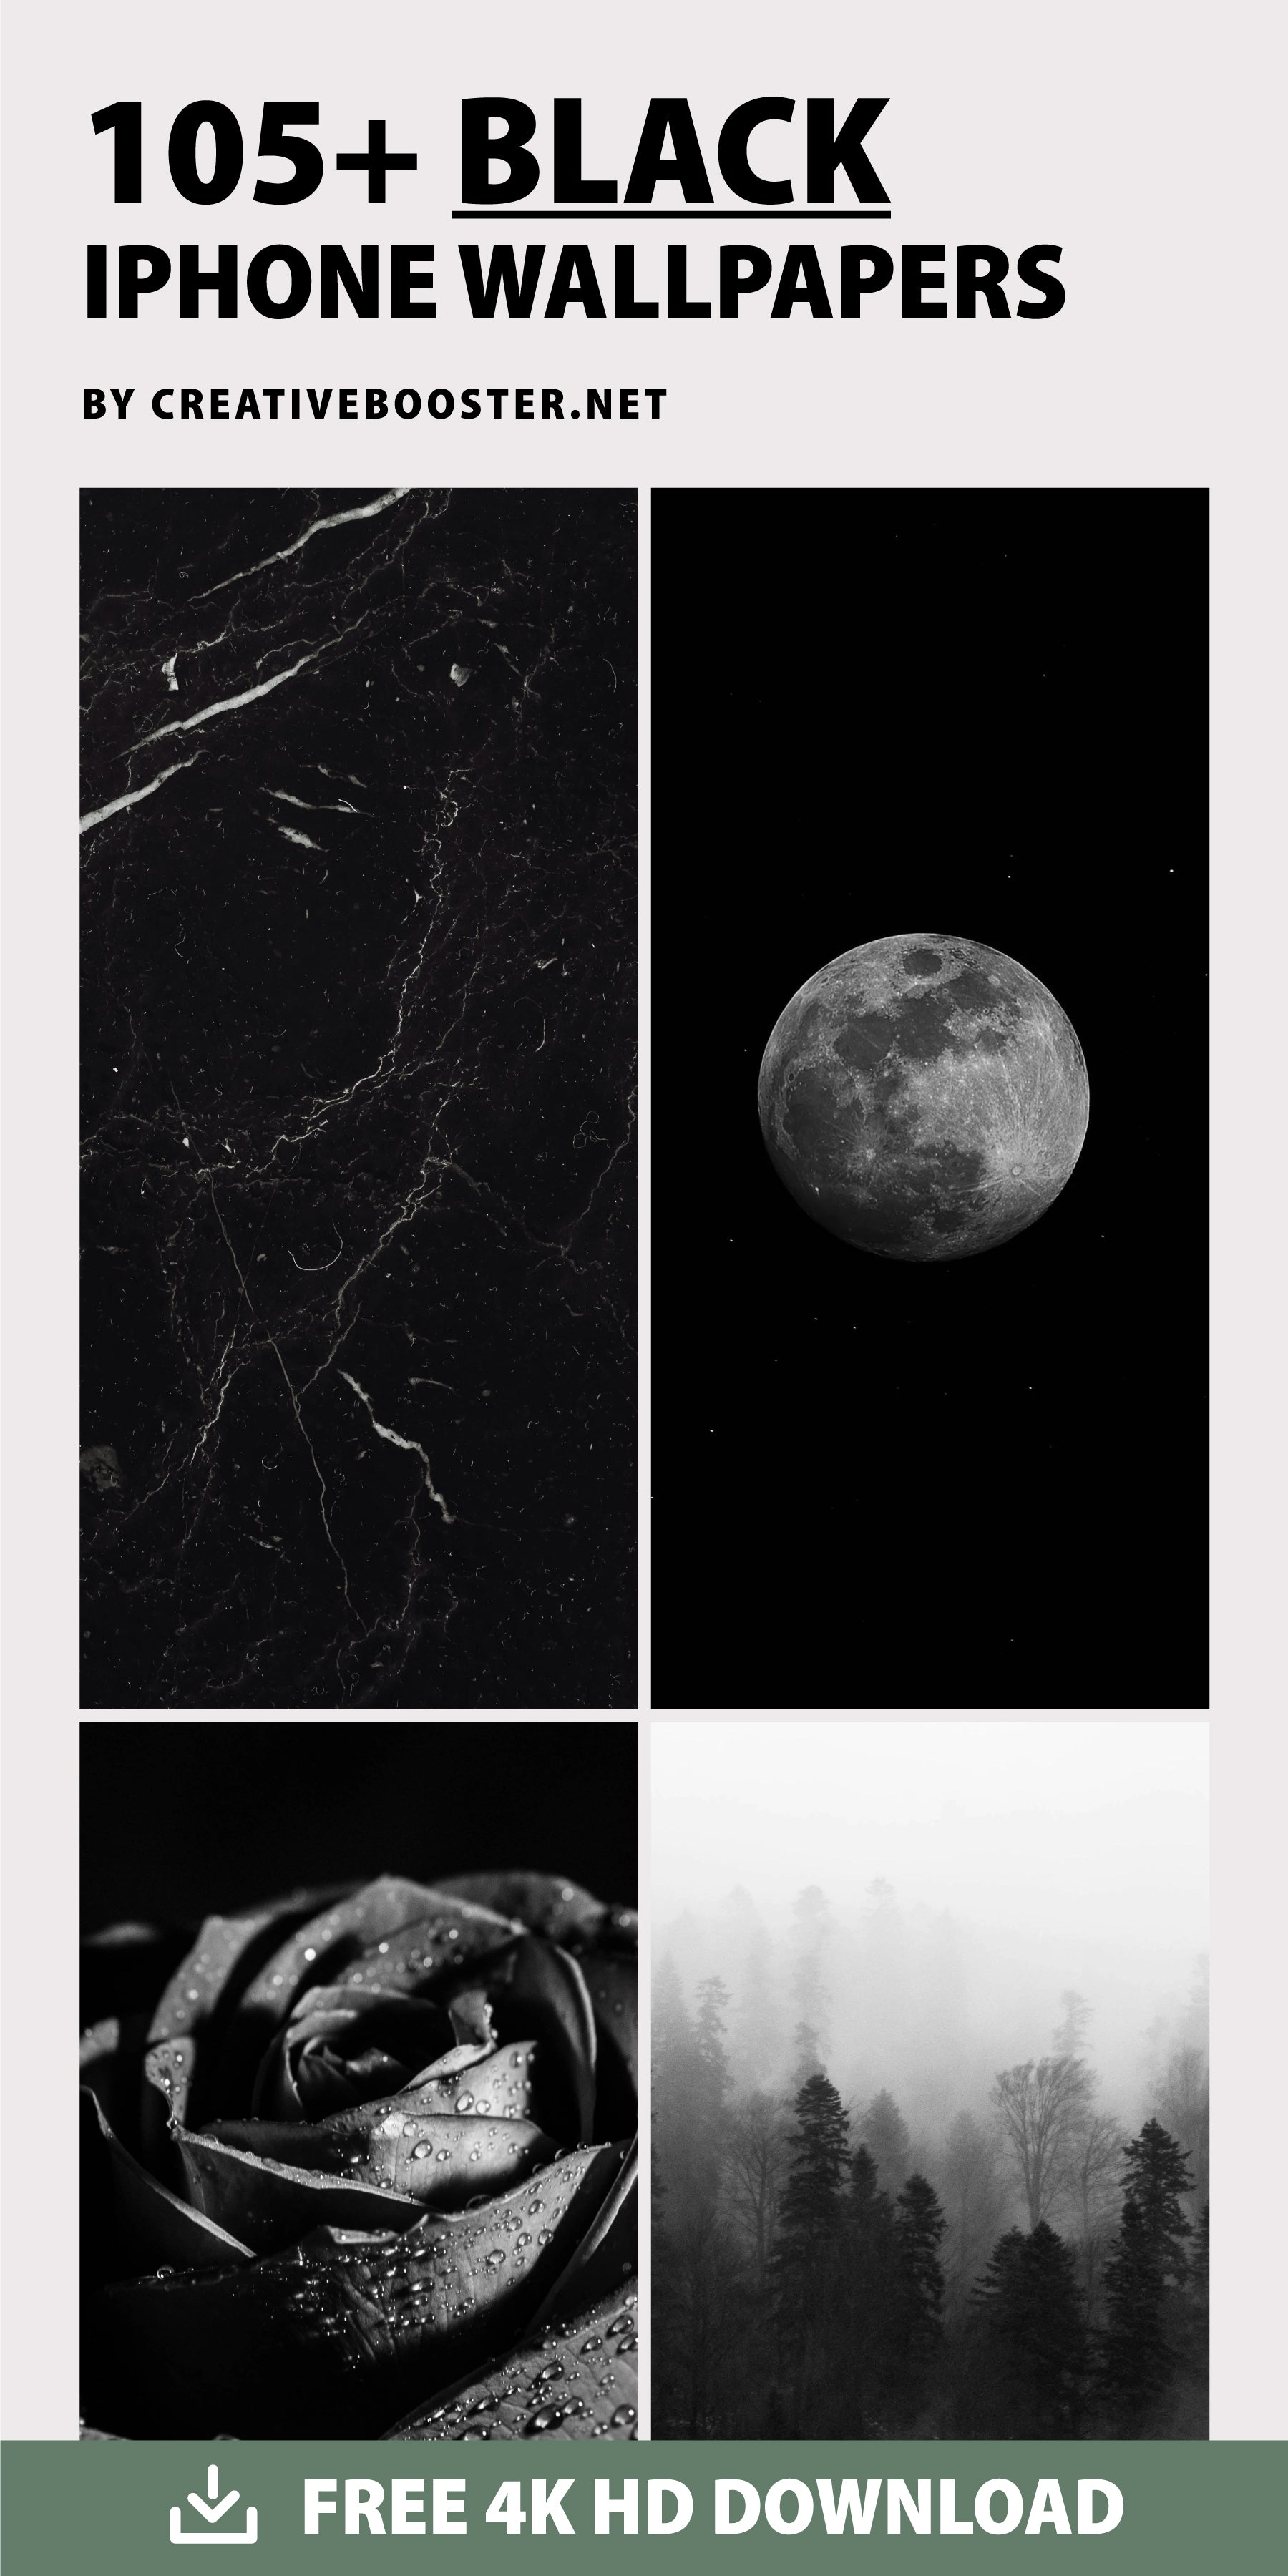 Best-Aesthetic-Black-iPhone-Wallpapers-Free-4k-HD-Download-Pinterest-Tall